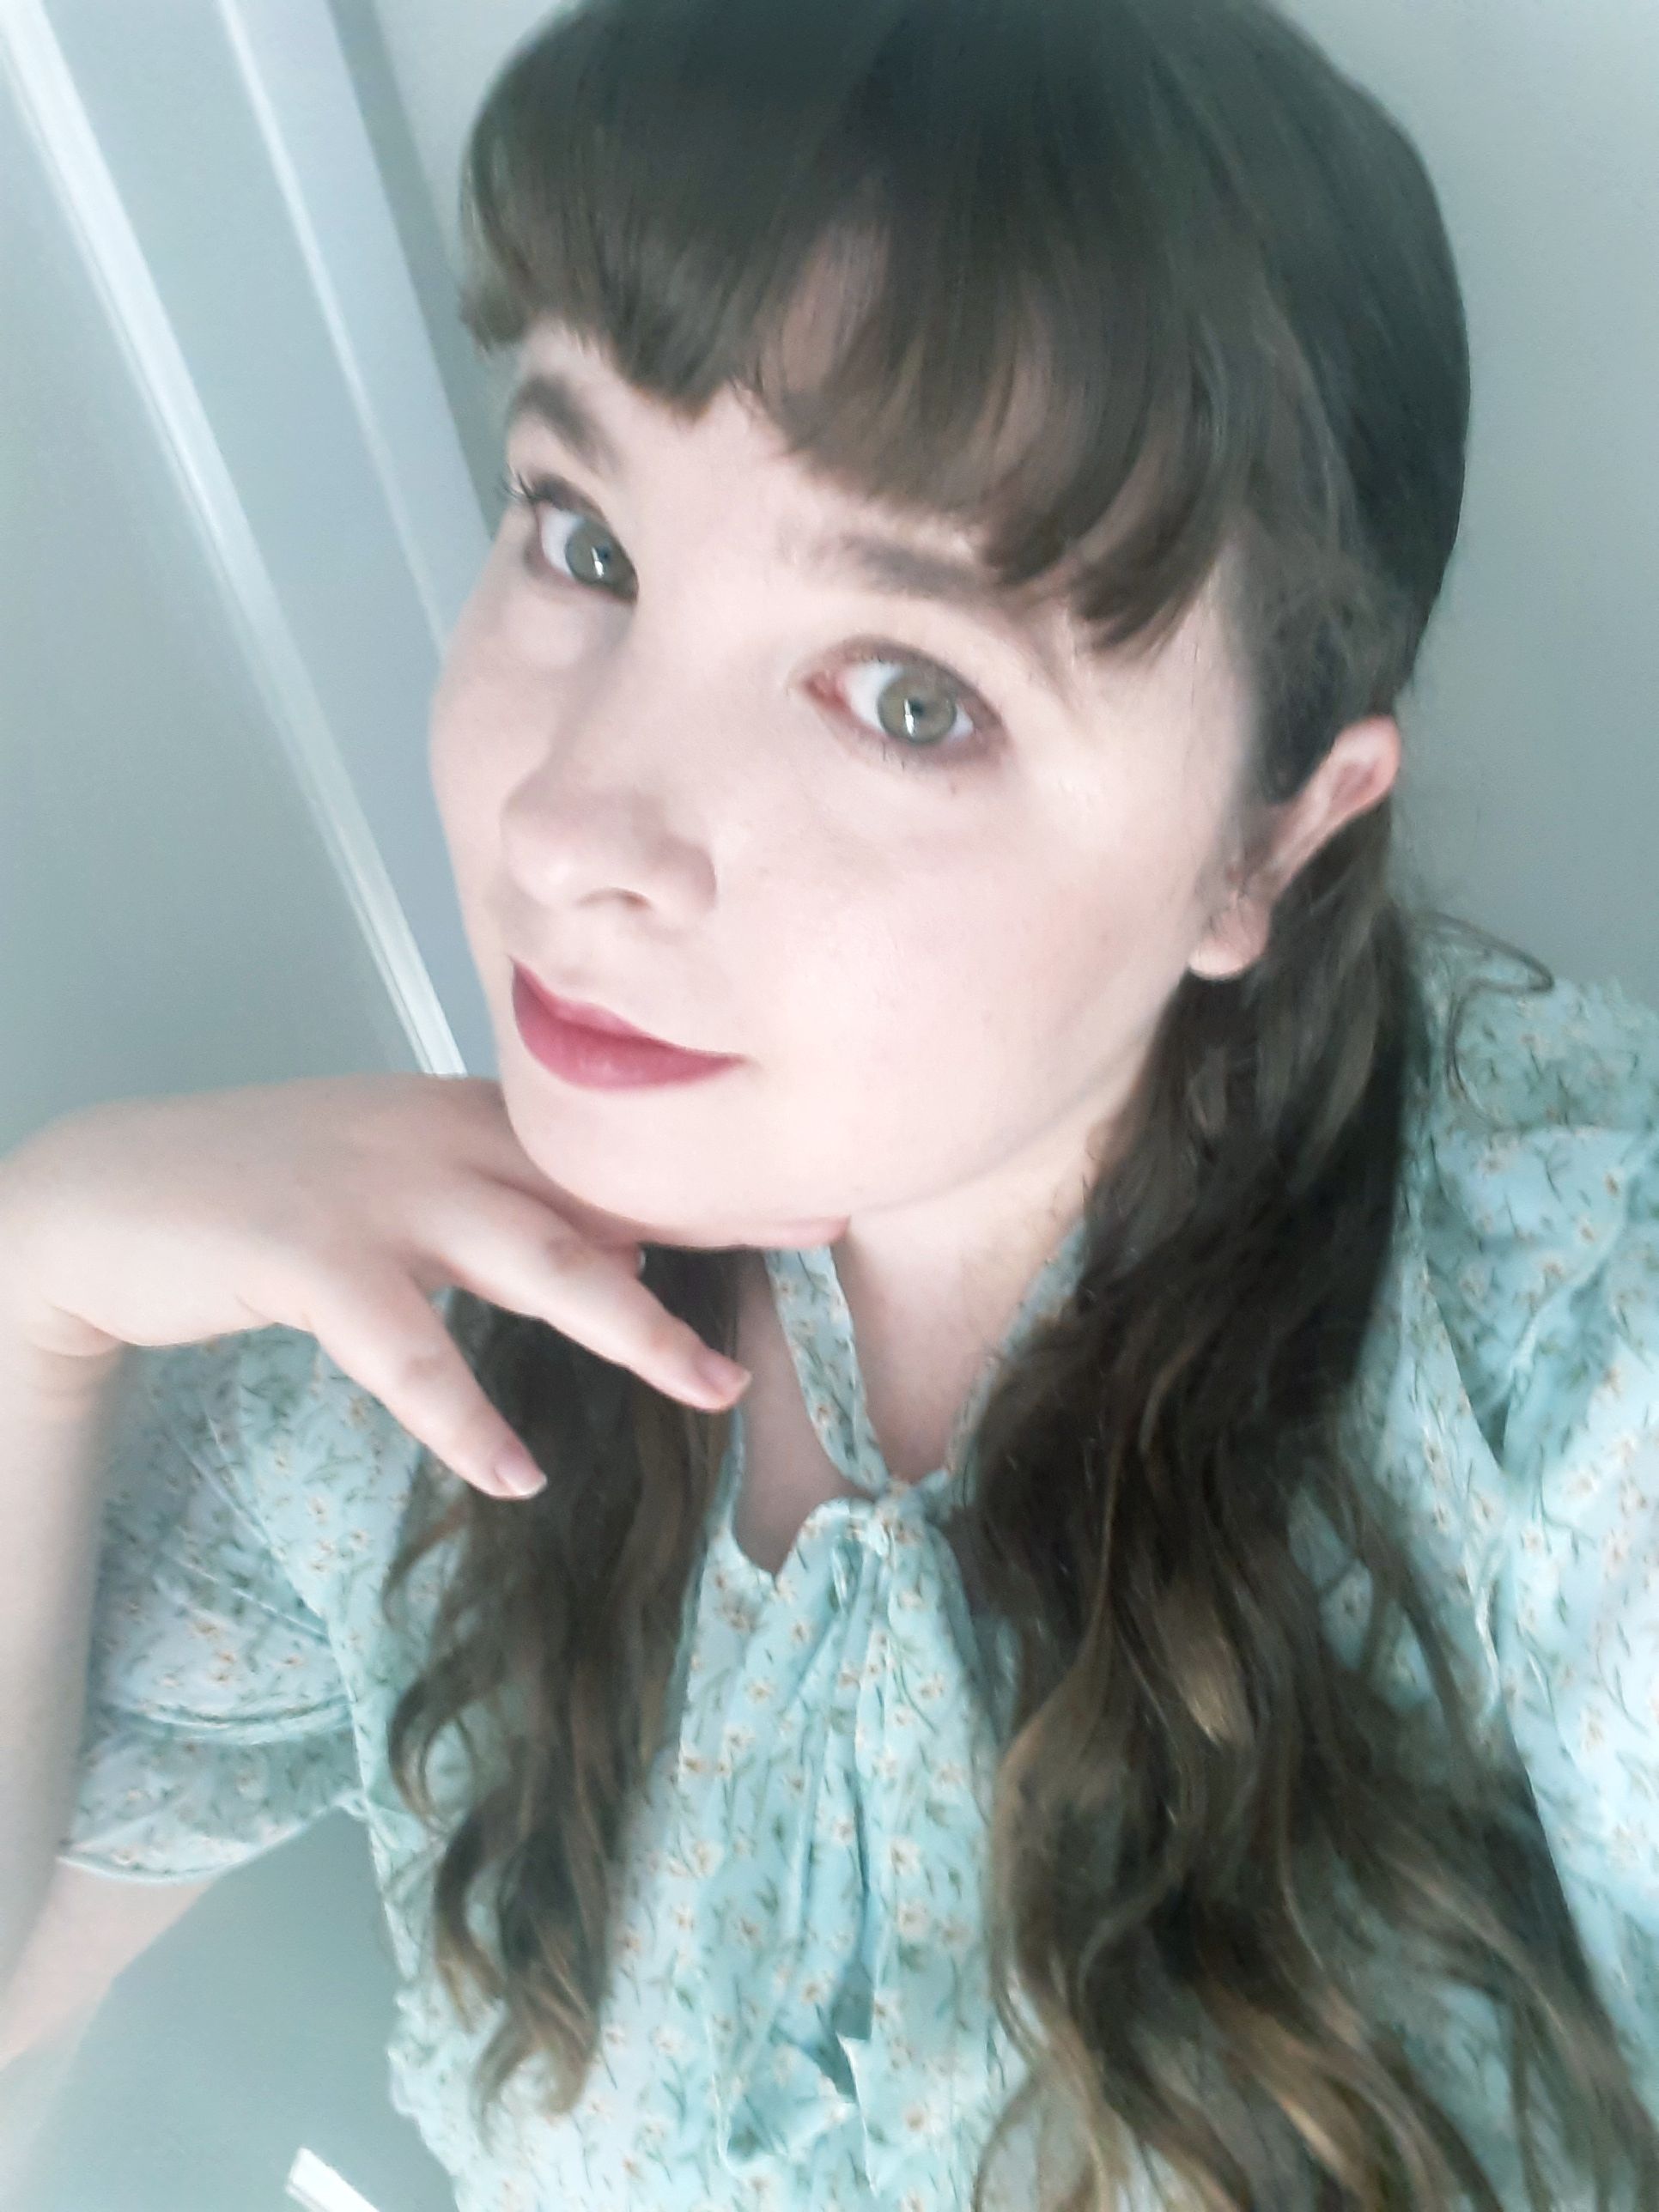 Chelsea Steele-Lists and Features Writer